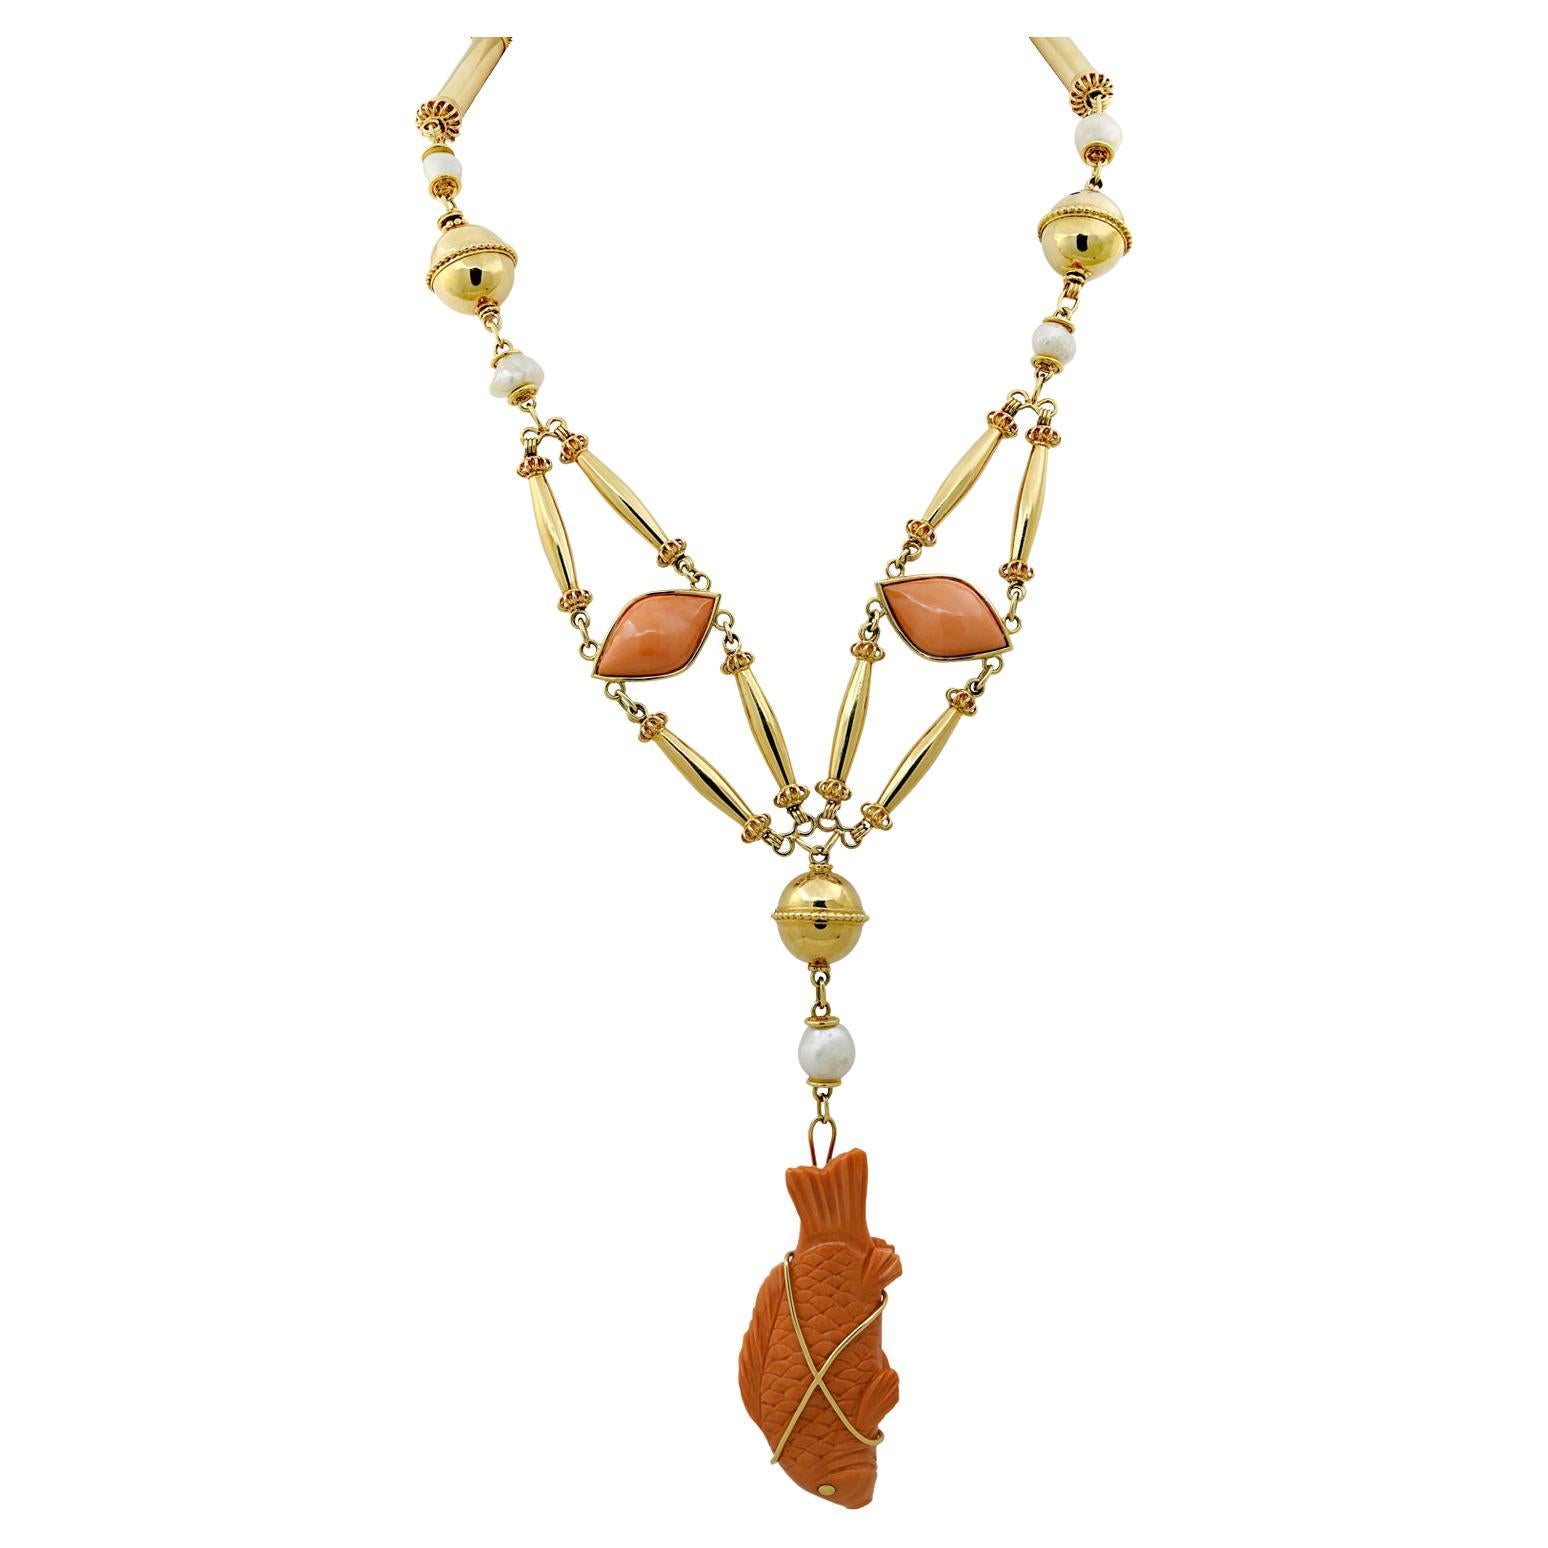 Cartier Cabochon Carved Coral Fish Necklace